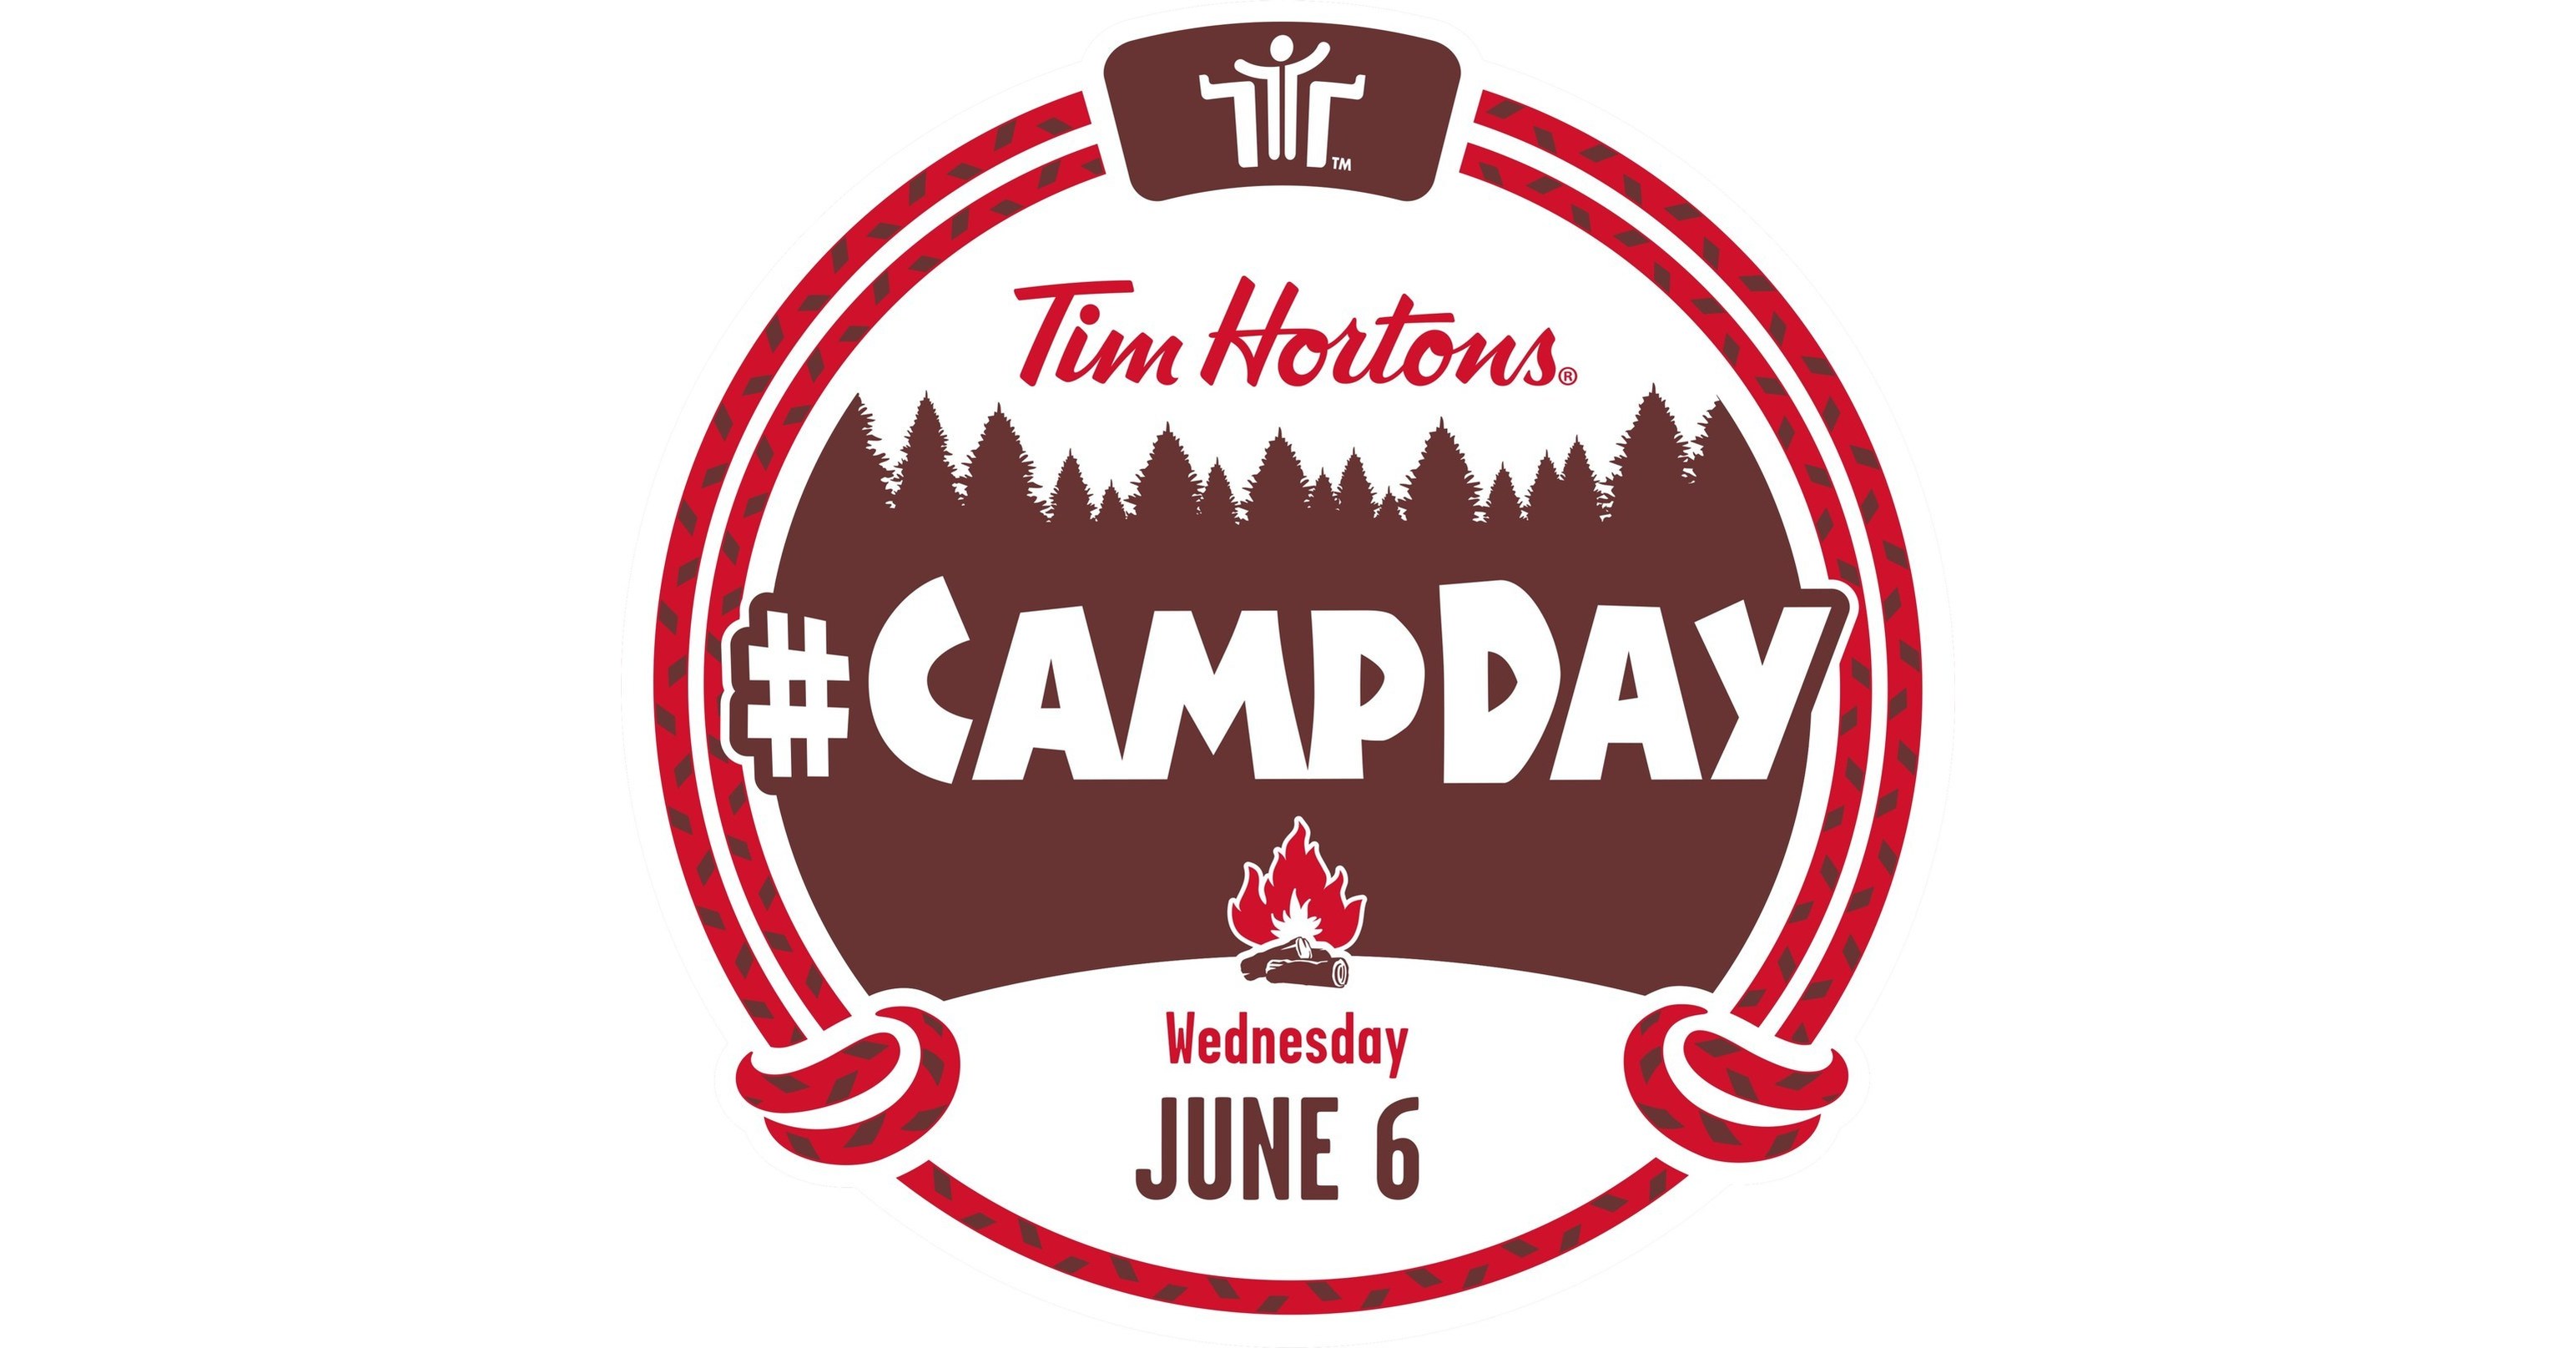 Tim Hortons® Camp Day Raises Over 13 Million for Youth to Take Part in